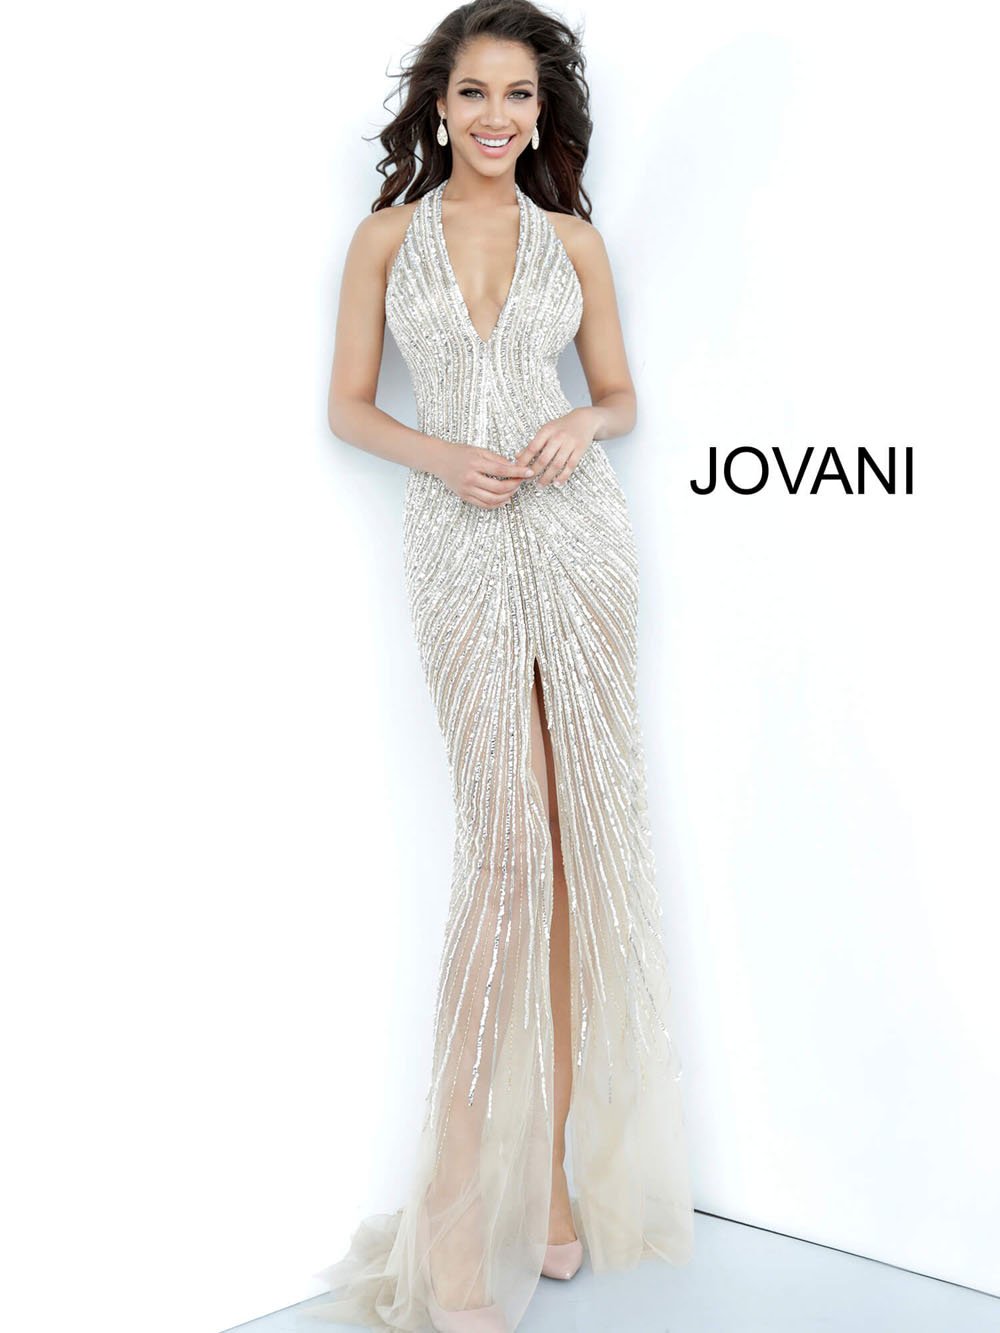 Jovani 2609 dress images in these colors: Nude.